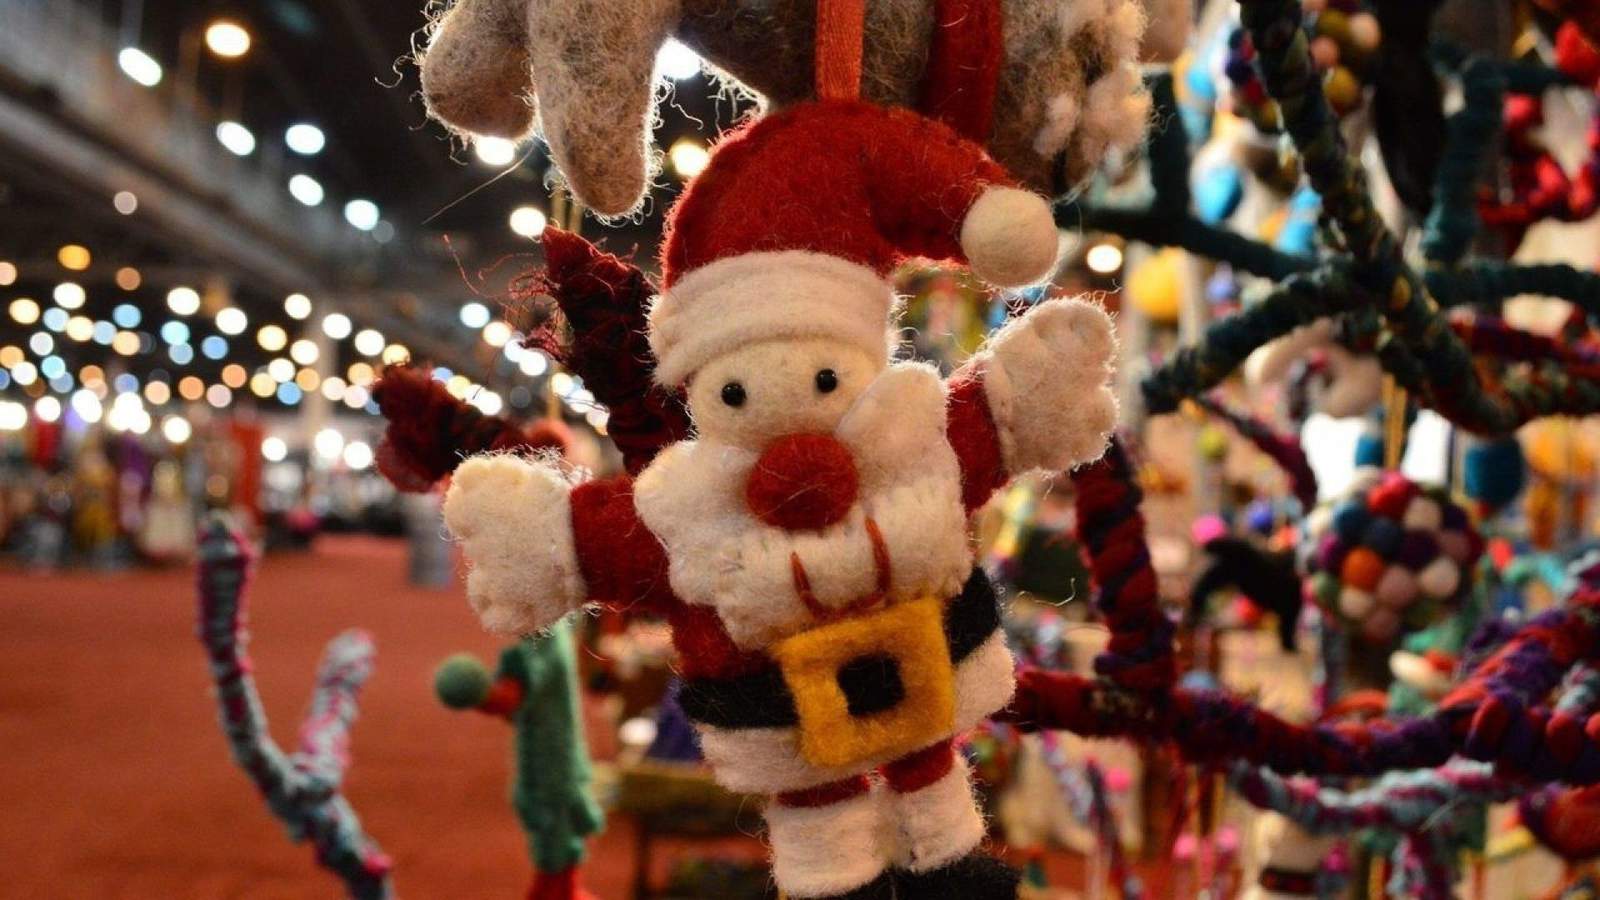 Get your credit cards ready! The 2020 Virtual Nutcracker Market opens this week